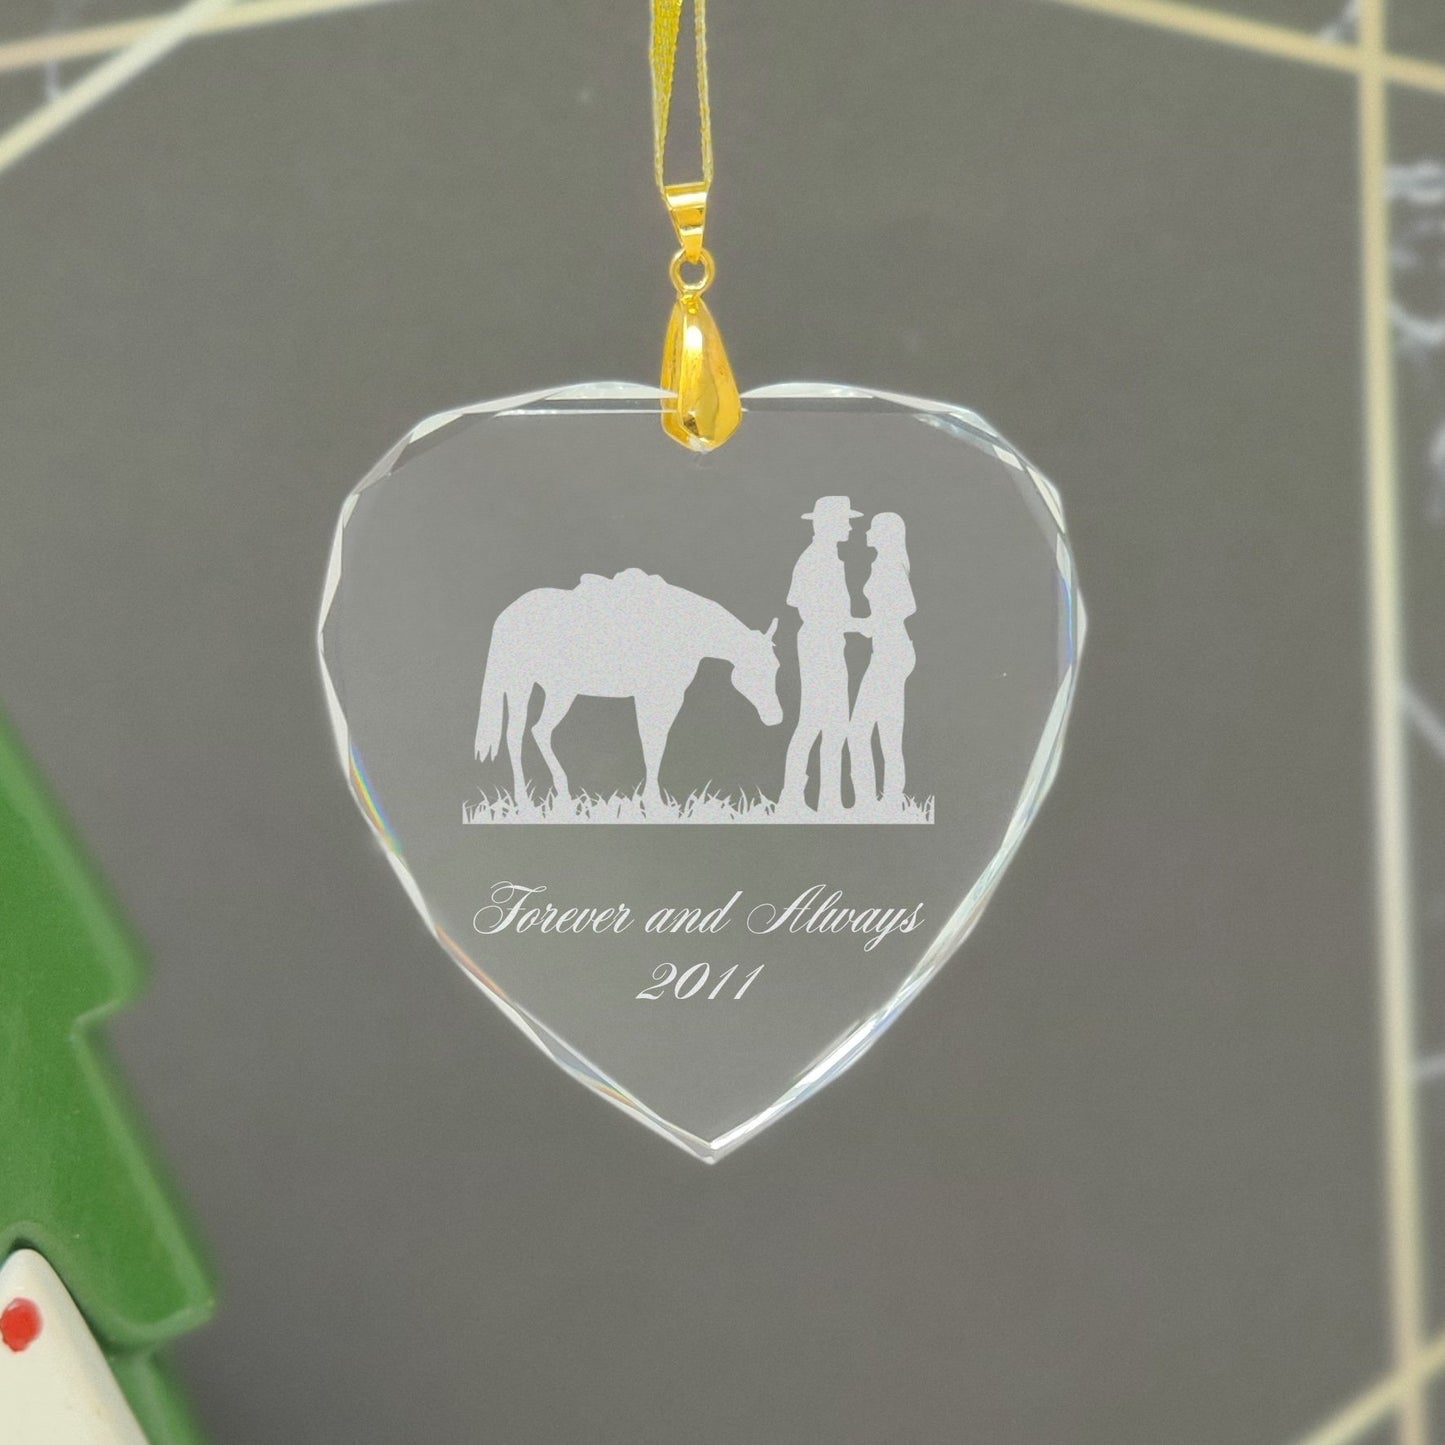 LaserGram Christmas Ornament, Urology, Personalized Engraving Included (Heart Shape)